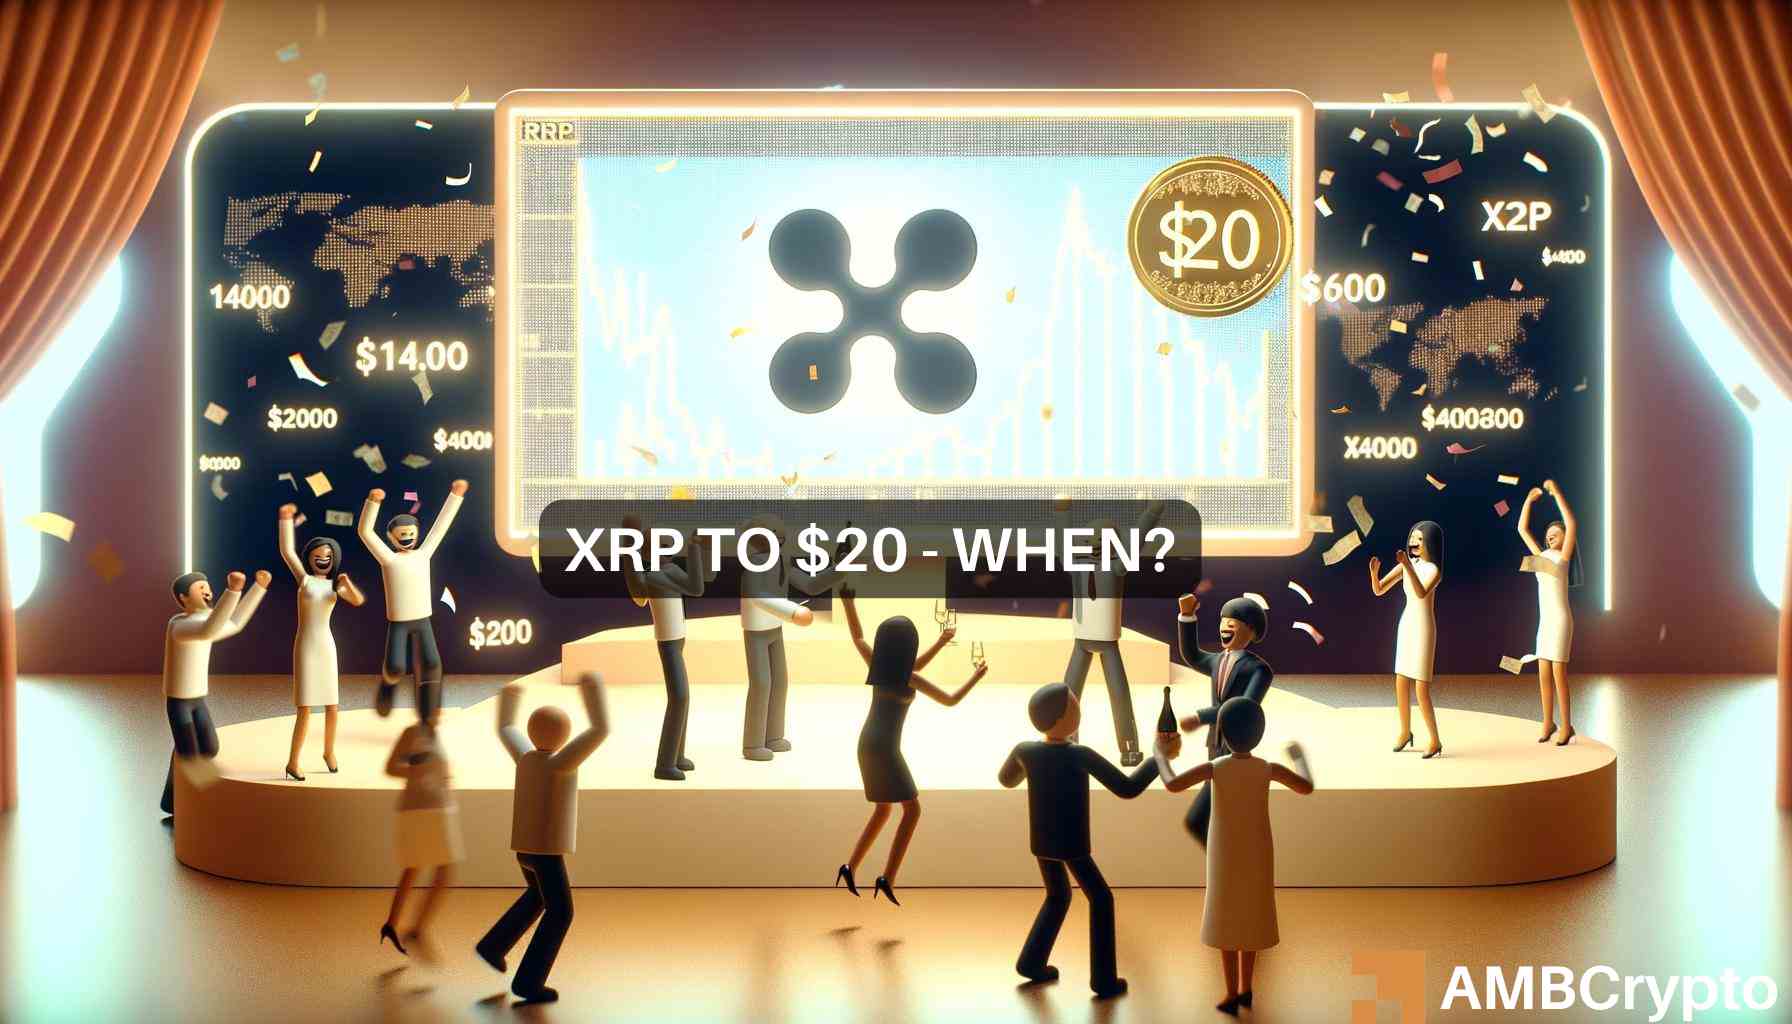 XRP price’s potential 650x surge – Examining if $20 is altcoin’s next target